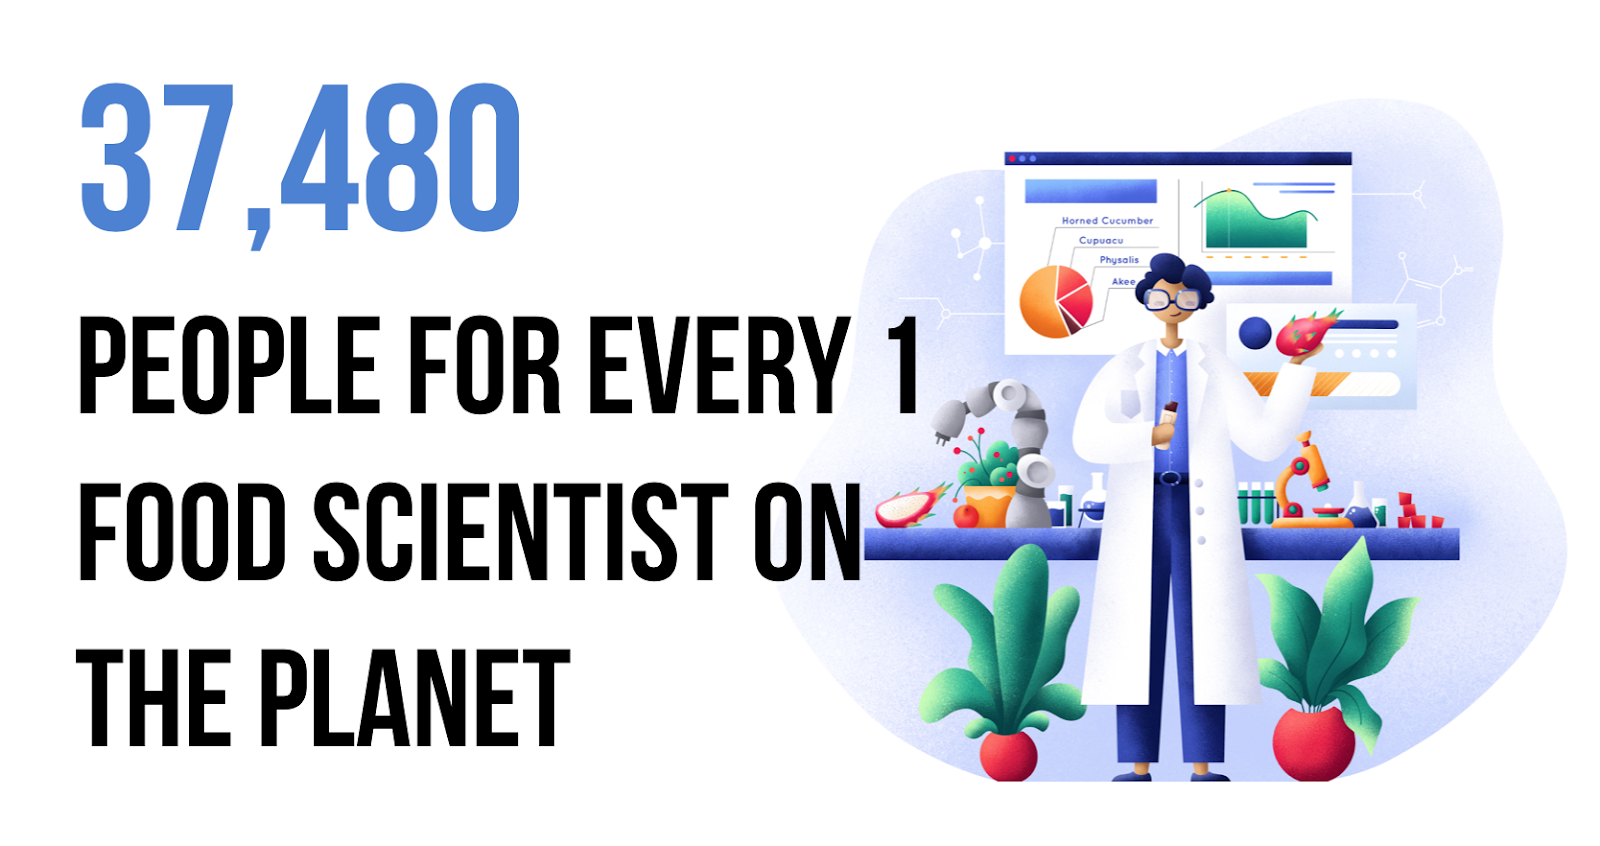  37,480 people for every 1 food scientist on the planet